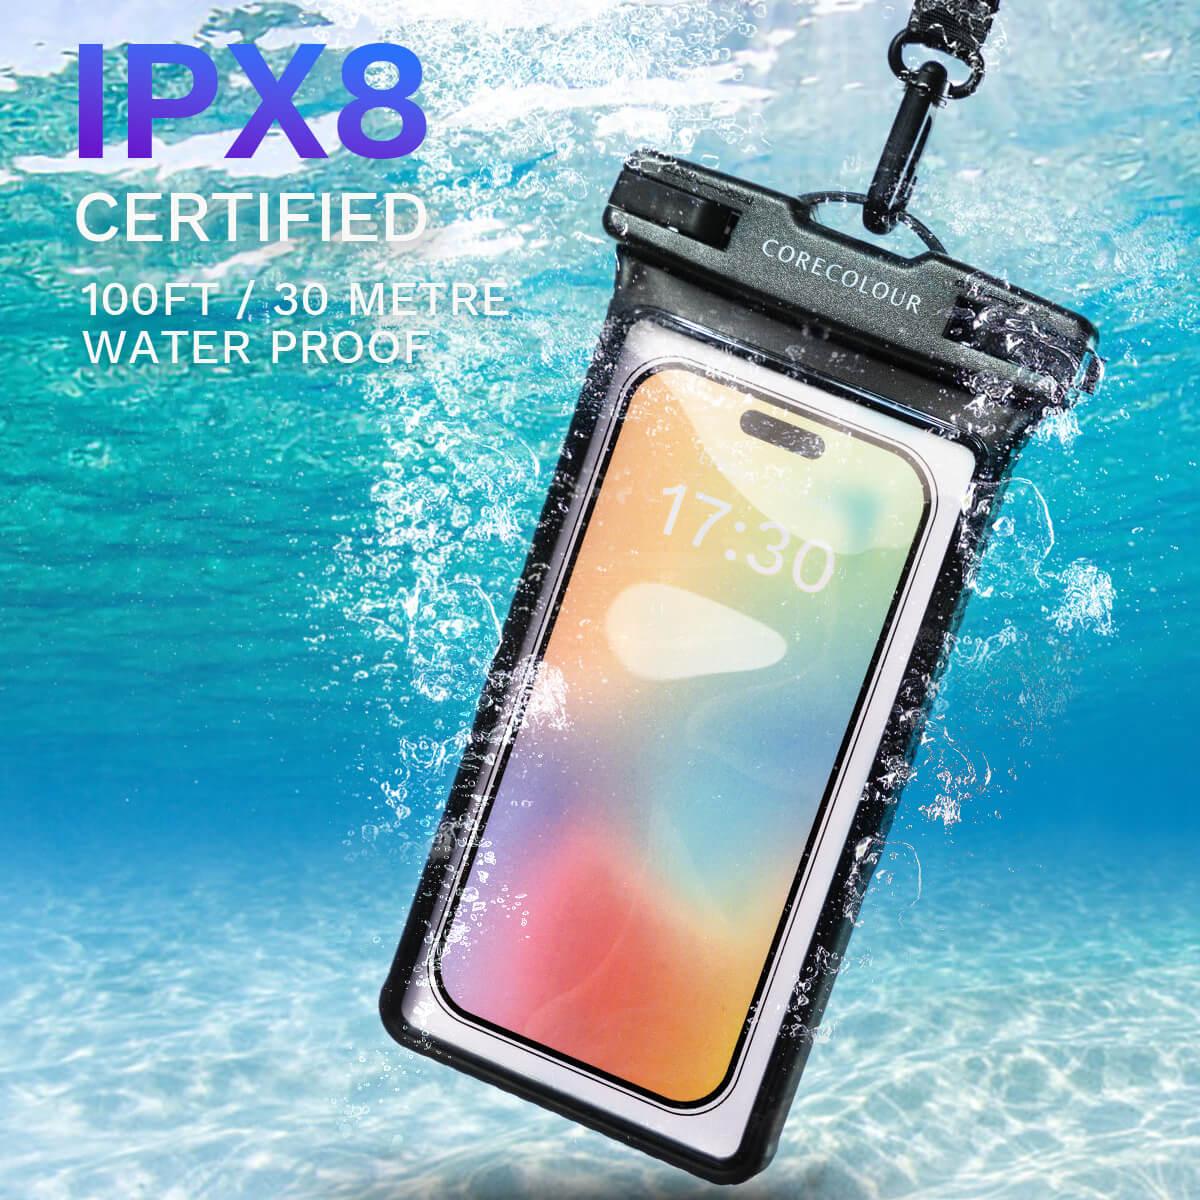 Green IPX8 Certified Water Proof Bag with Lanyard - CORECOLOUR